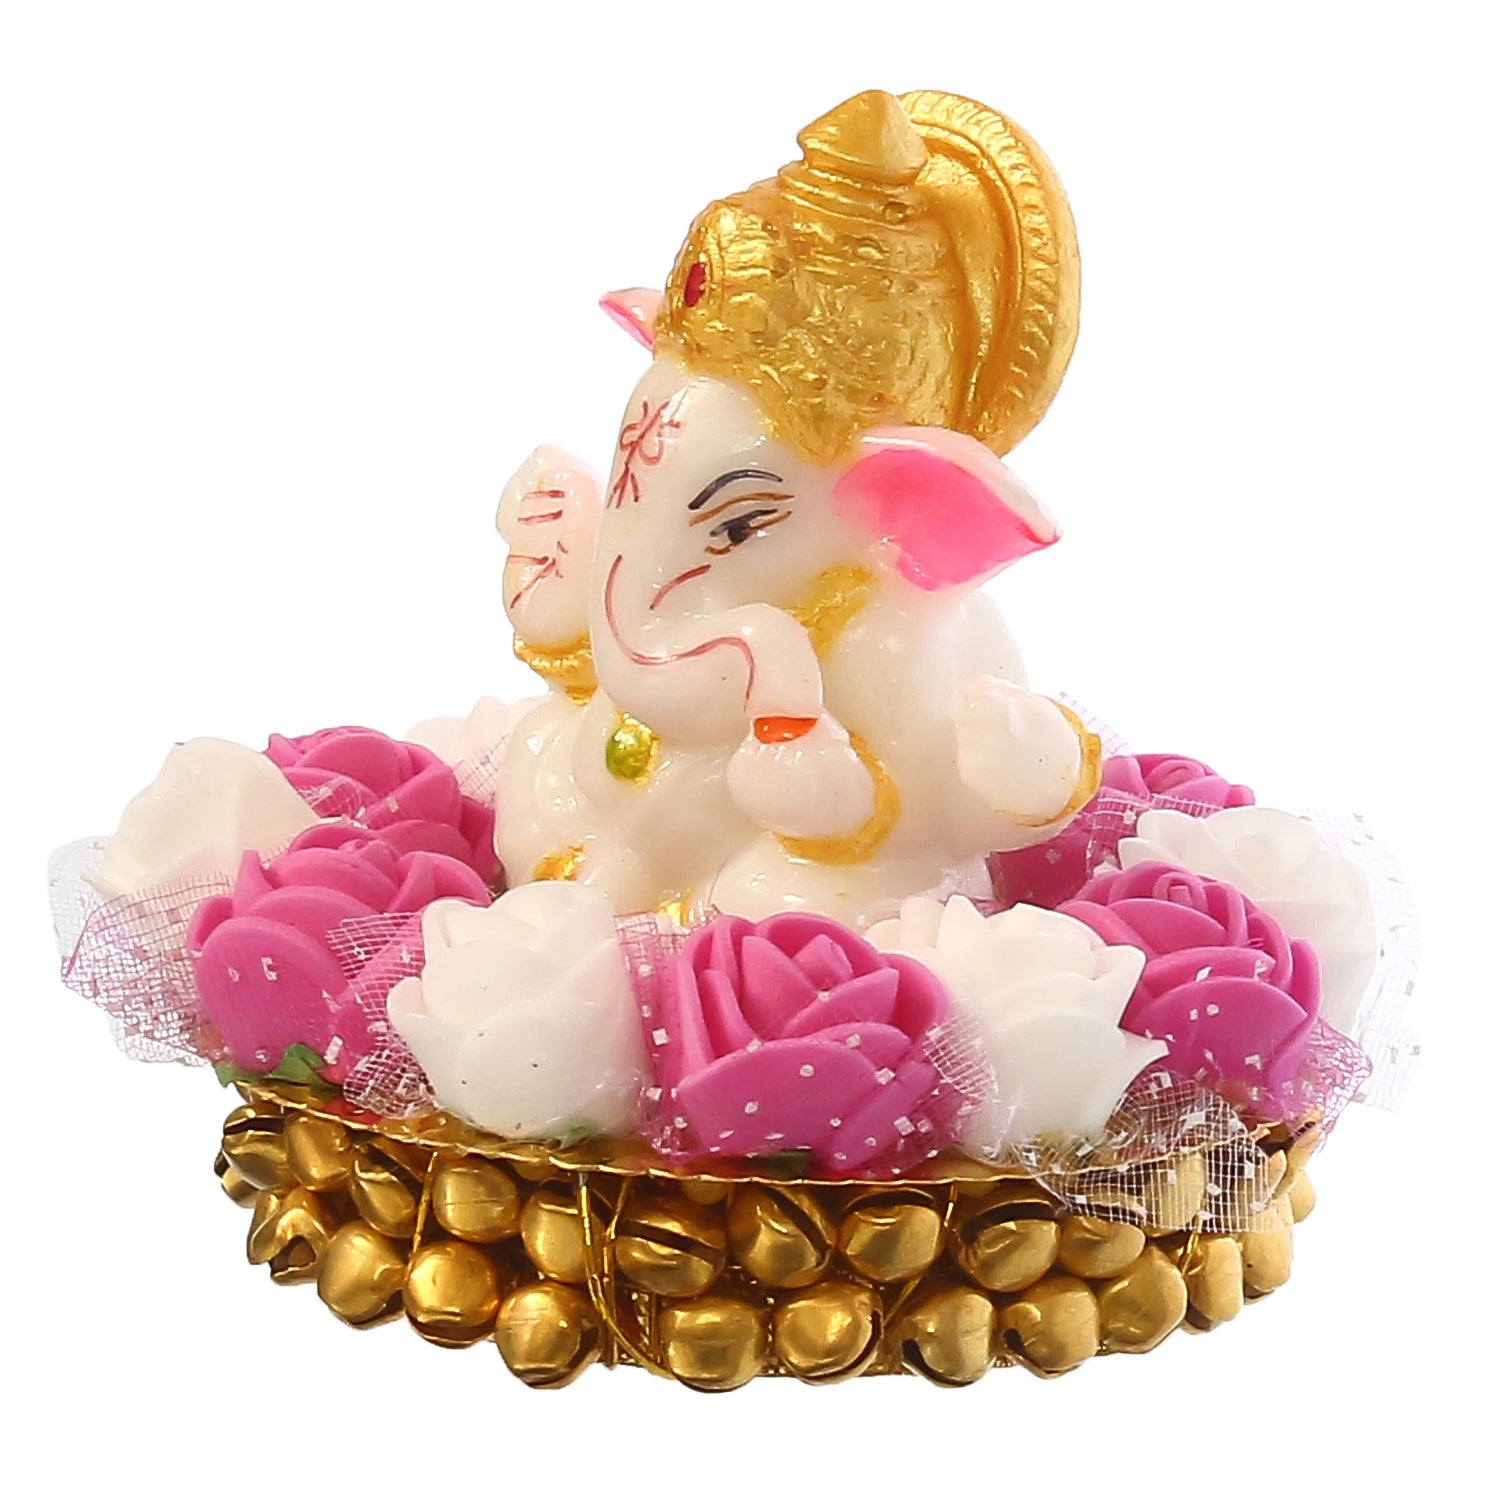 Golden and White Polyresin Lord Ganesha Idol on Decorative Handcrafted Plate with Pink and White Flowers 5